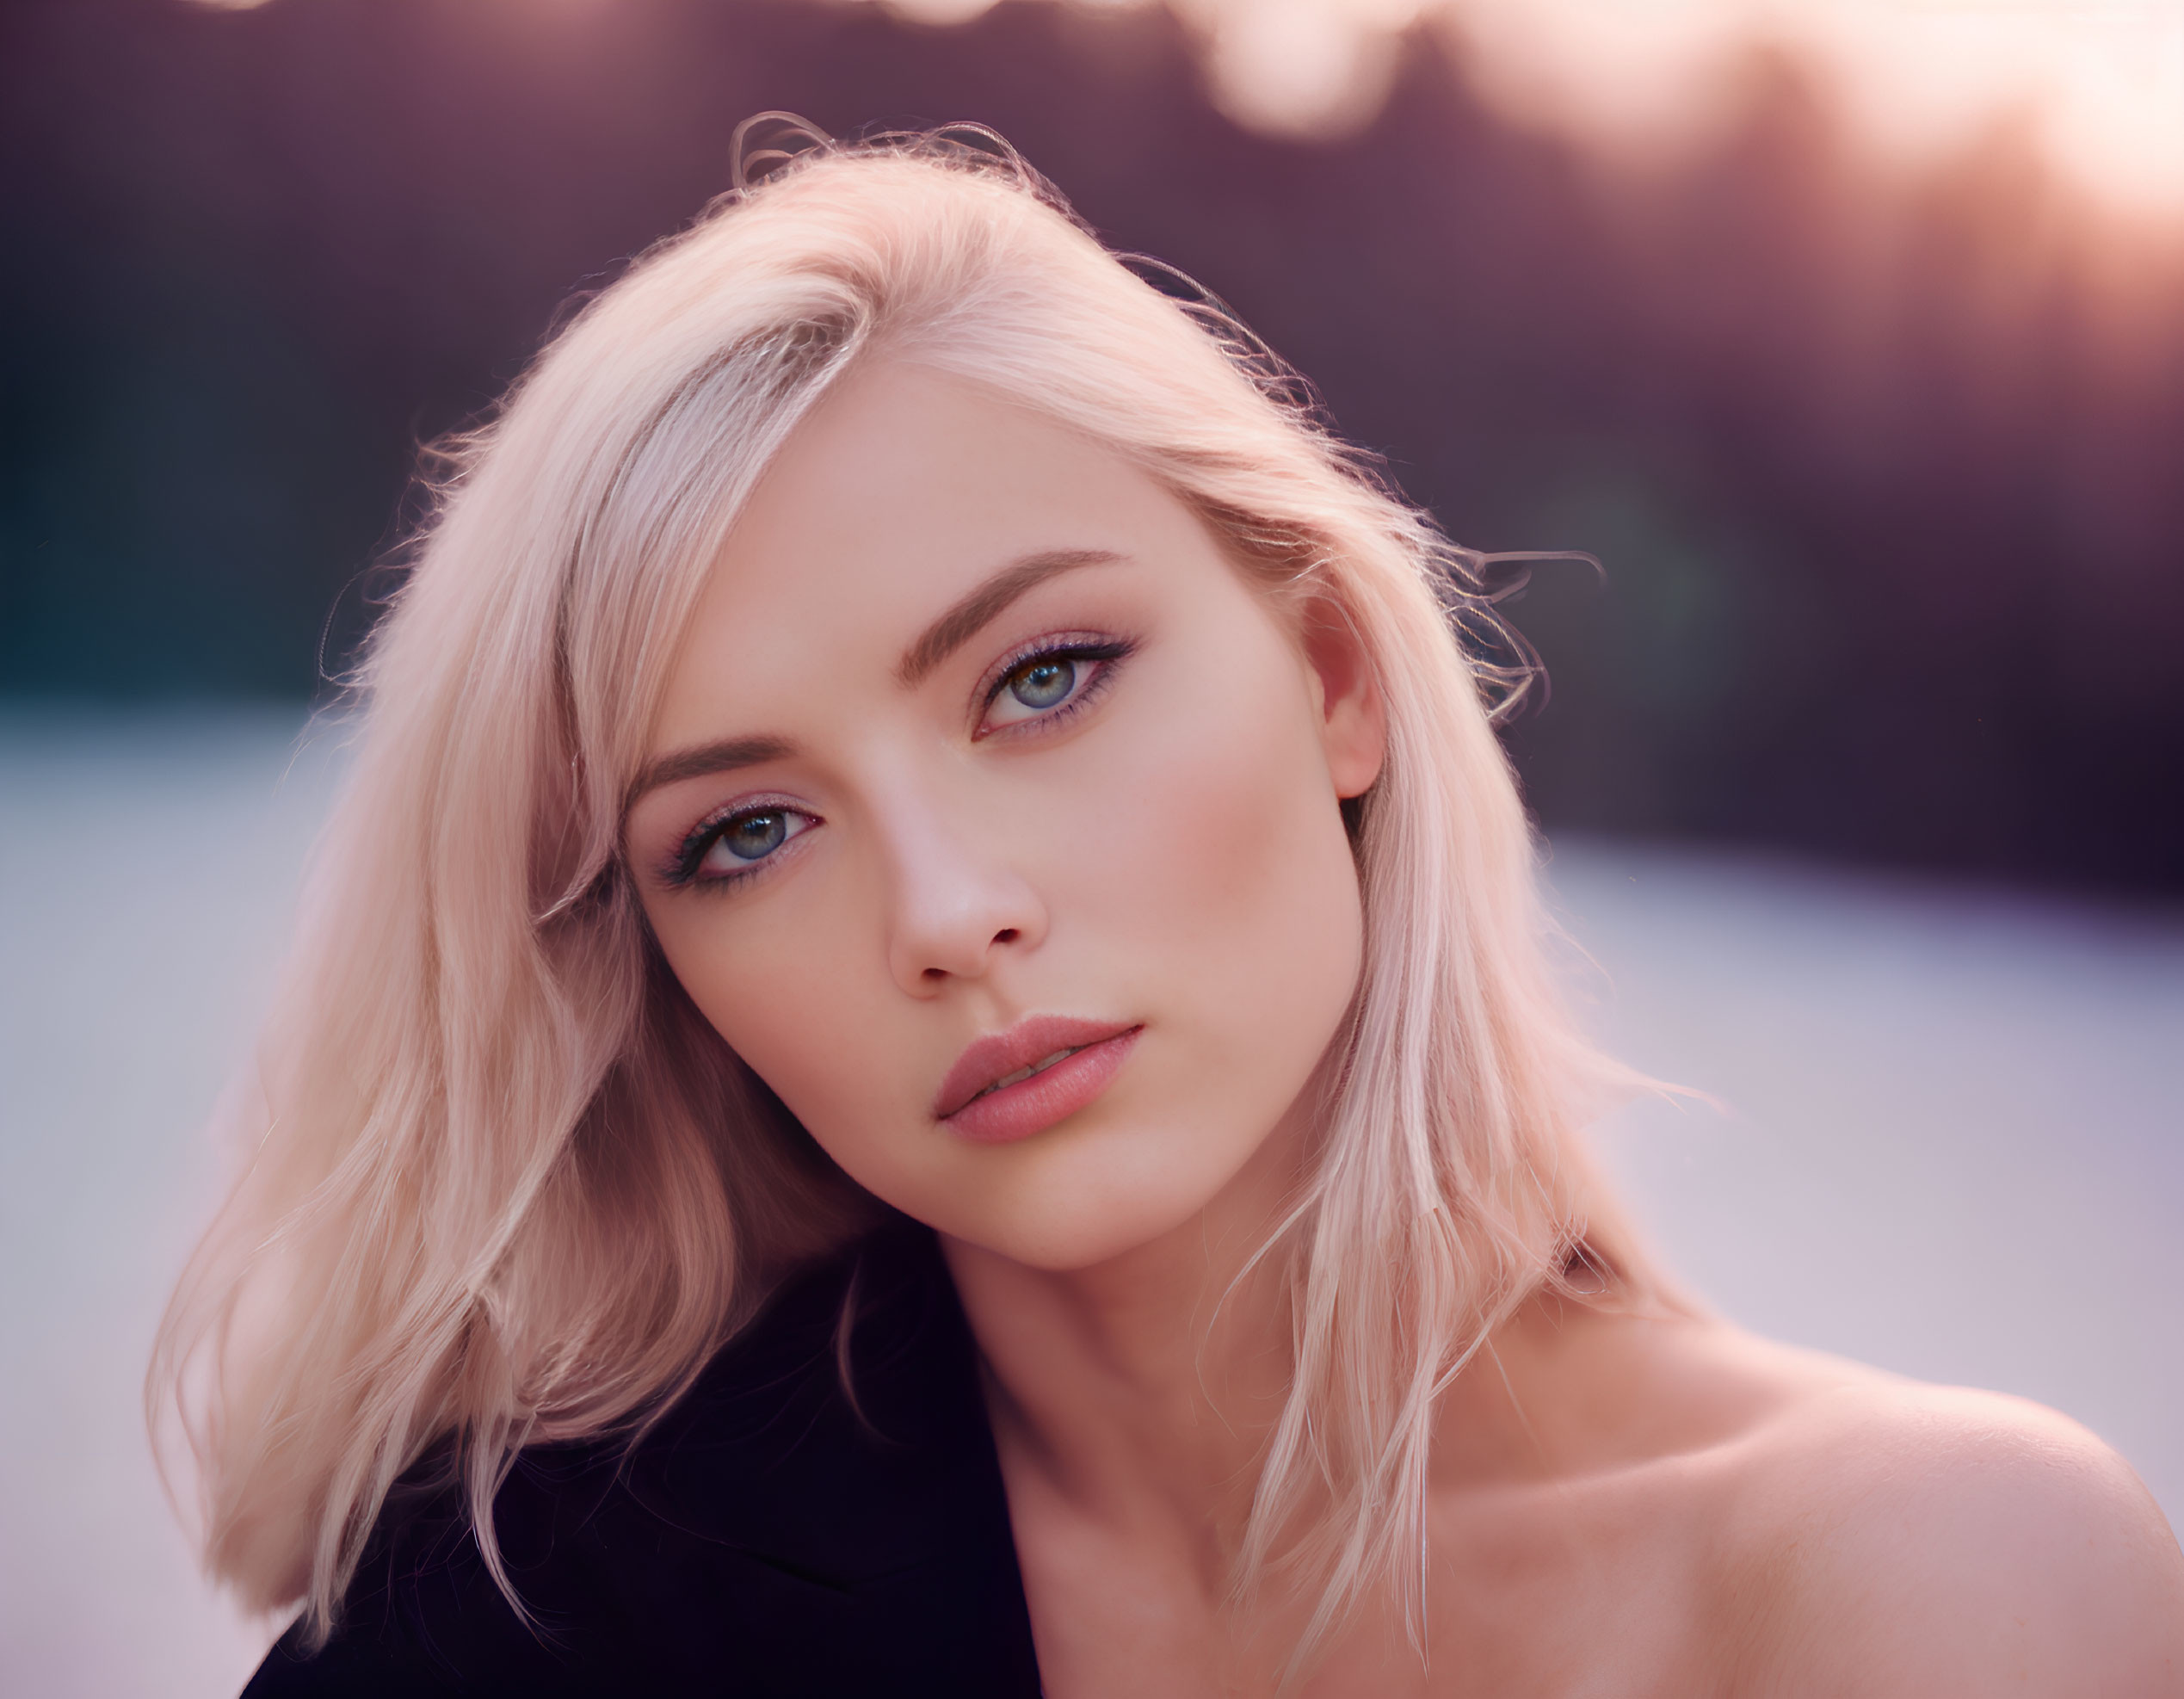 Blonde woman portrait with striking eyes and bare shoulder